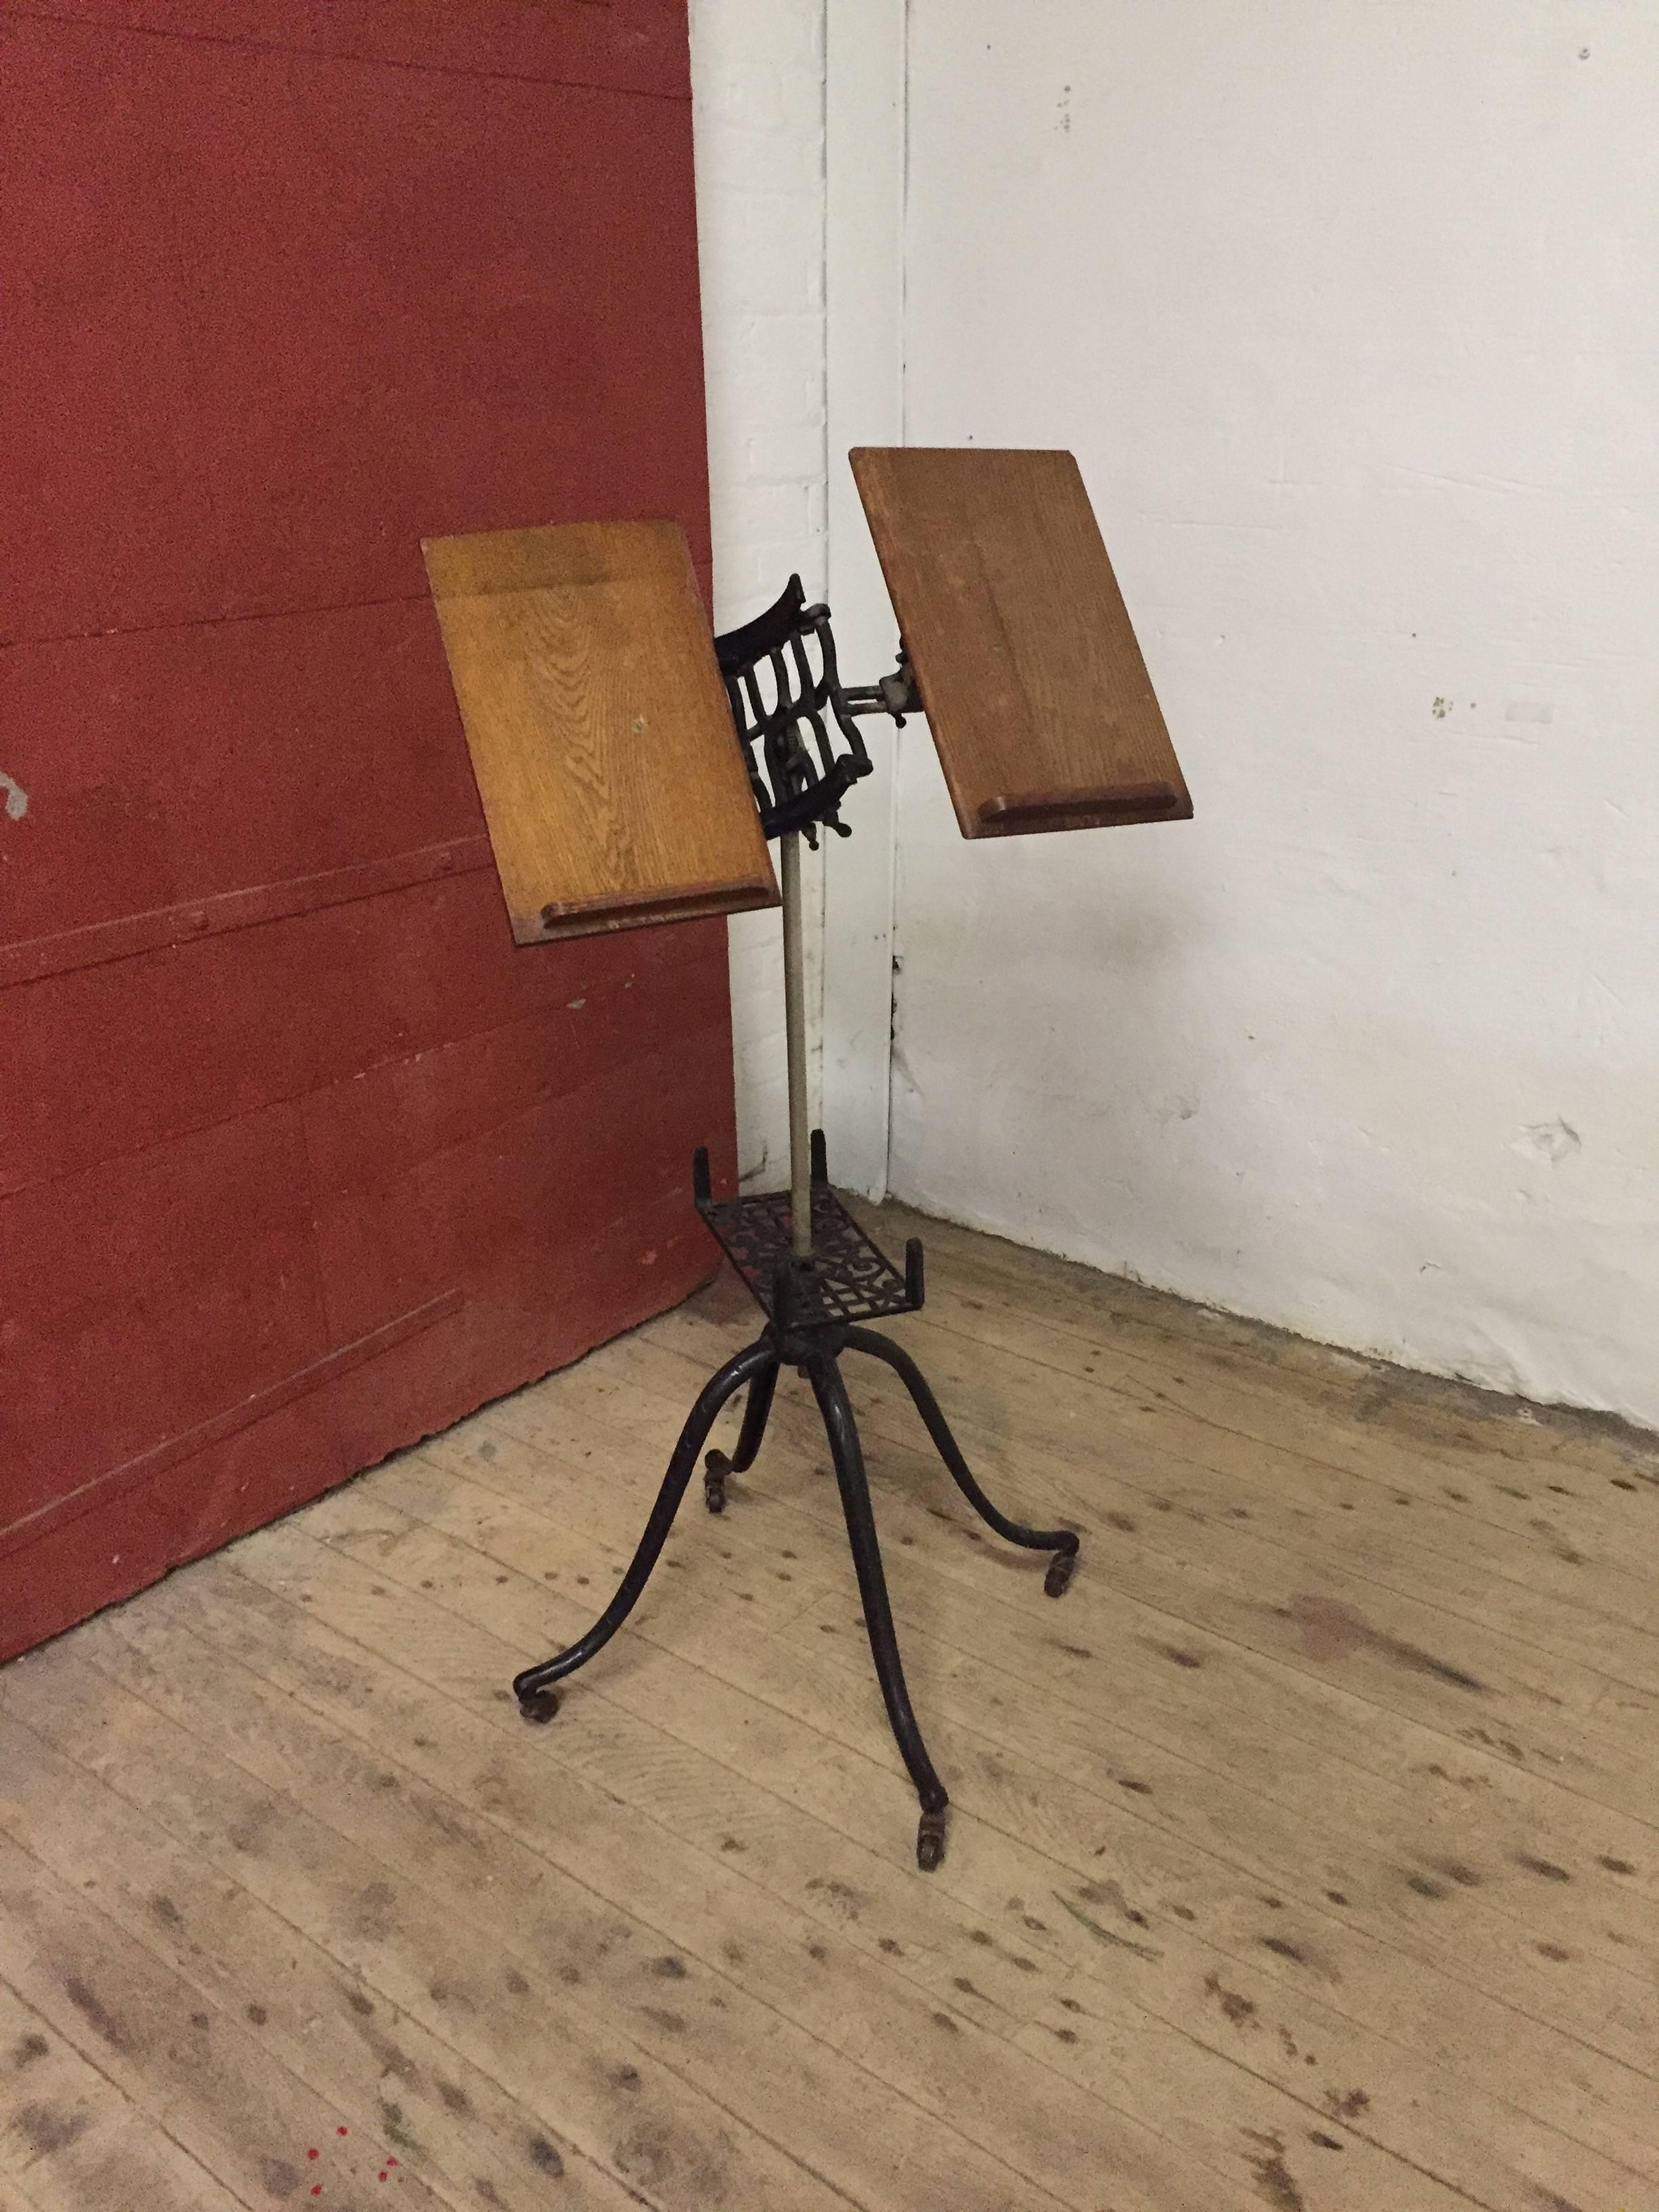 Fully adjustable iron and oak book stand, circa 1900. Beautiful wrought iron base and hardware with tilting oak panels for large and small books. Original finish. 

Full extended height is approximately 44". The base is 23" x 23".